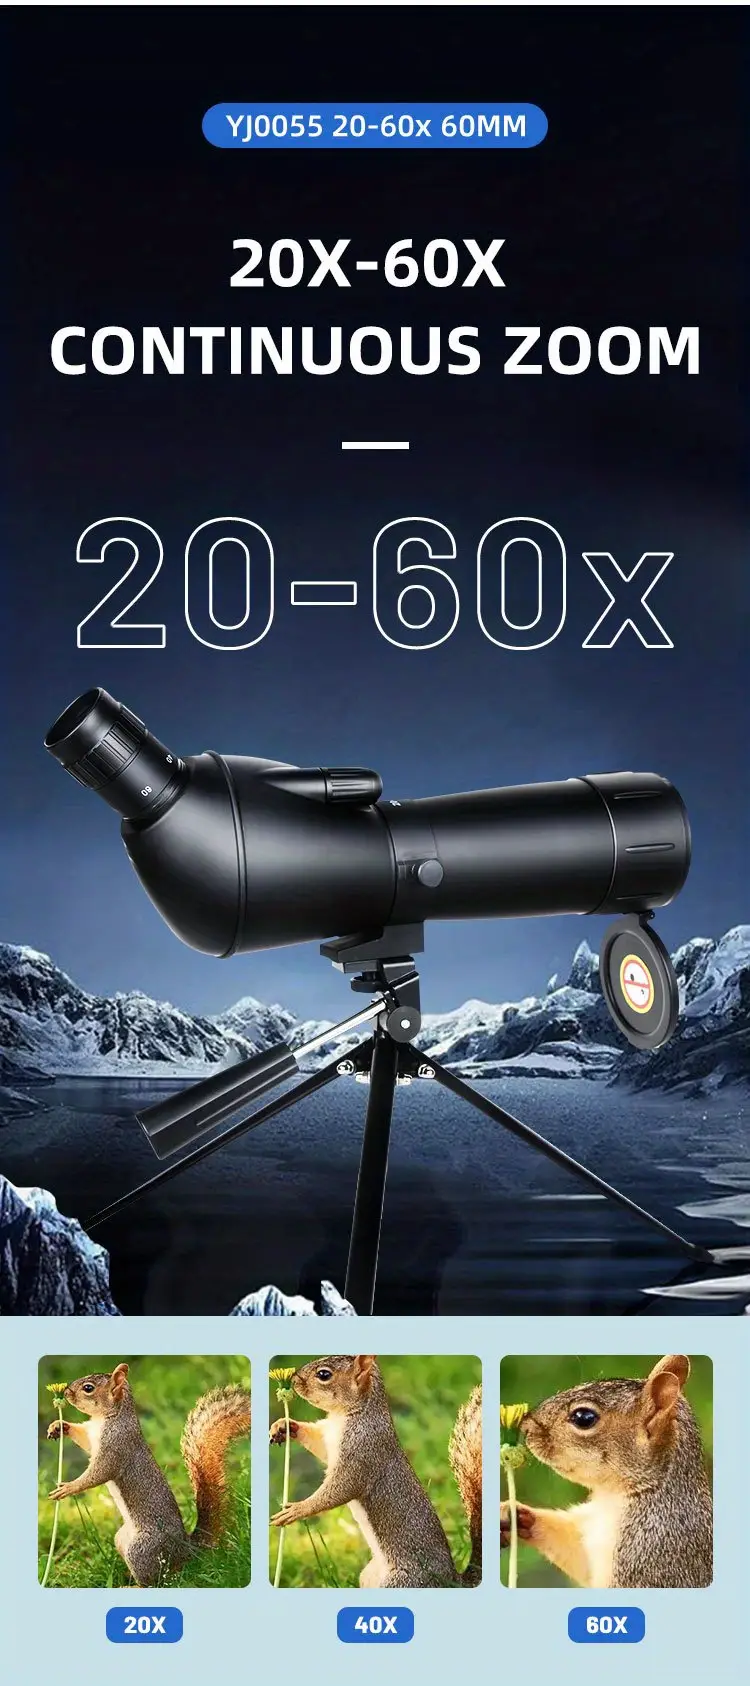 1pc professional monocular hd high power telescope for animal bird watching hunting camping tourist scenery details 4